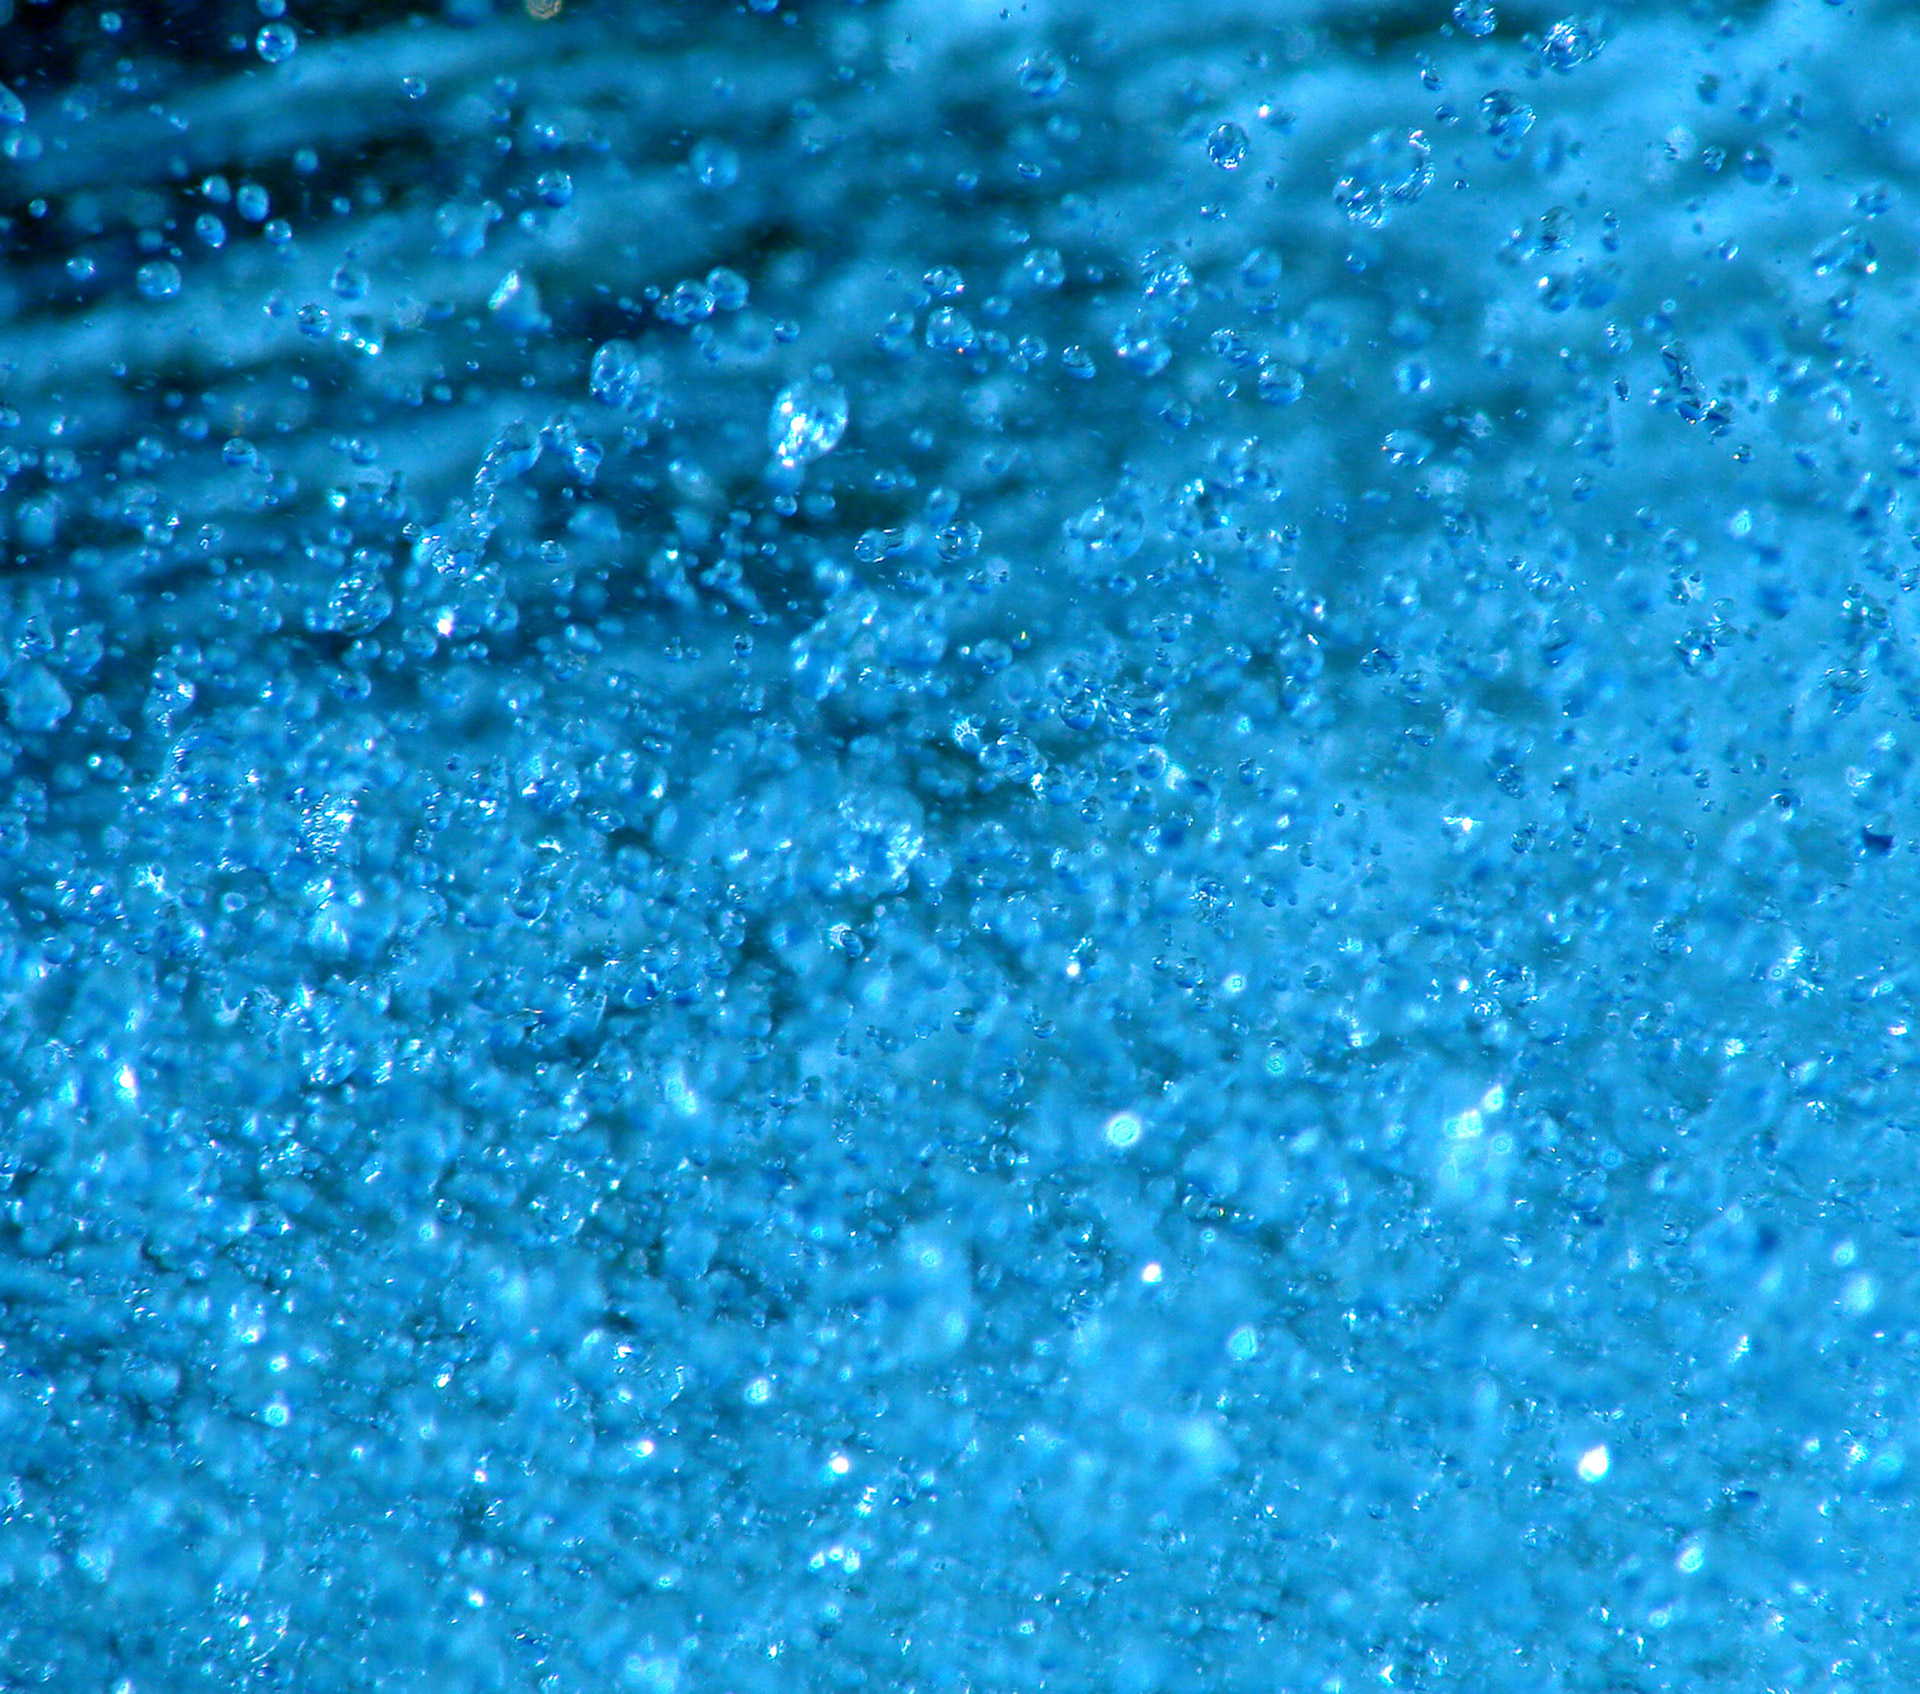 Water droplets kicked up by the boat as it cruises on Lake Truman in Missouri.